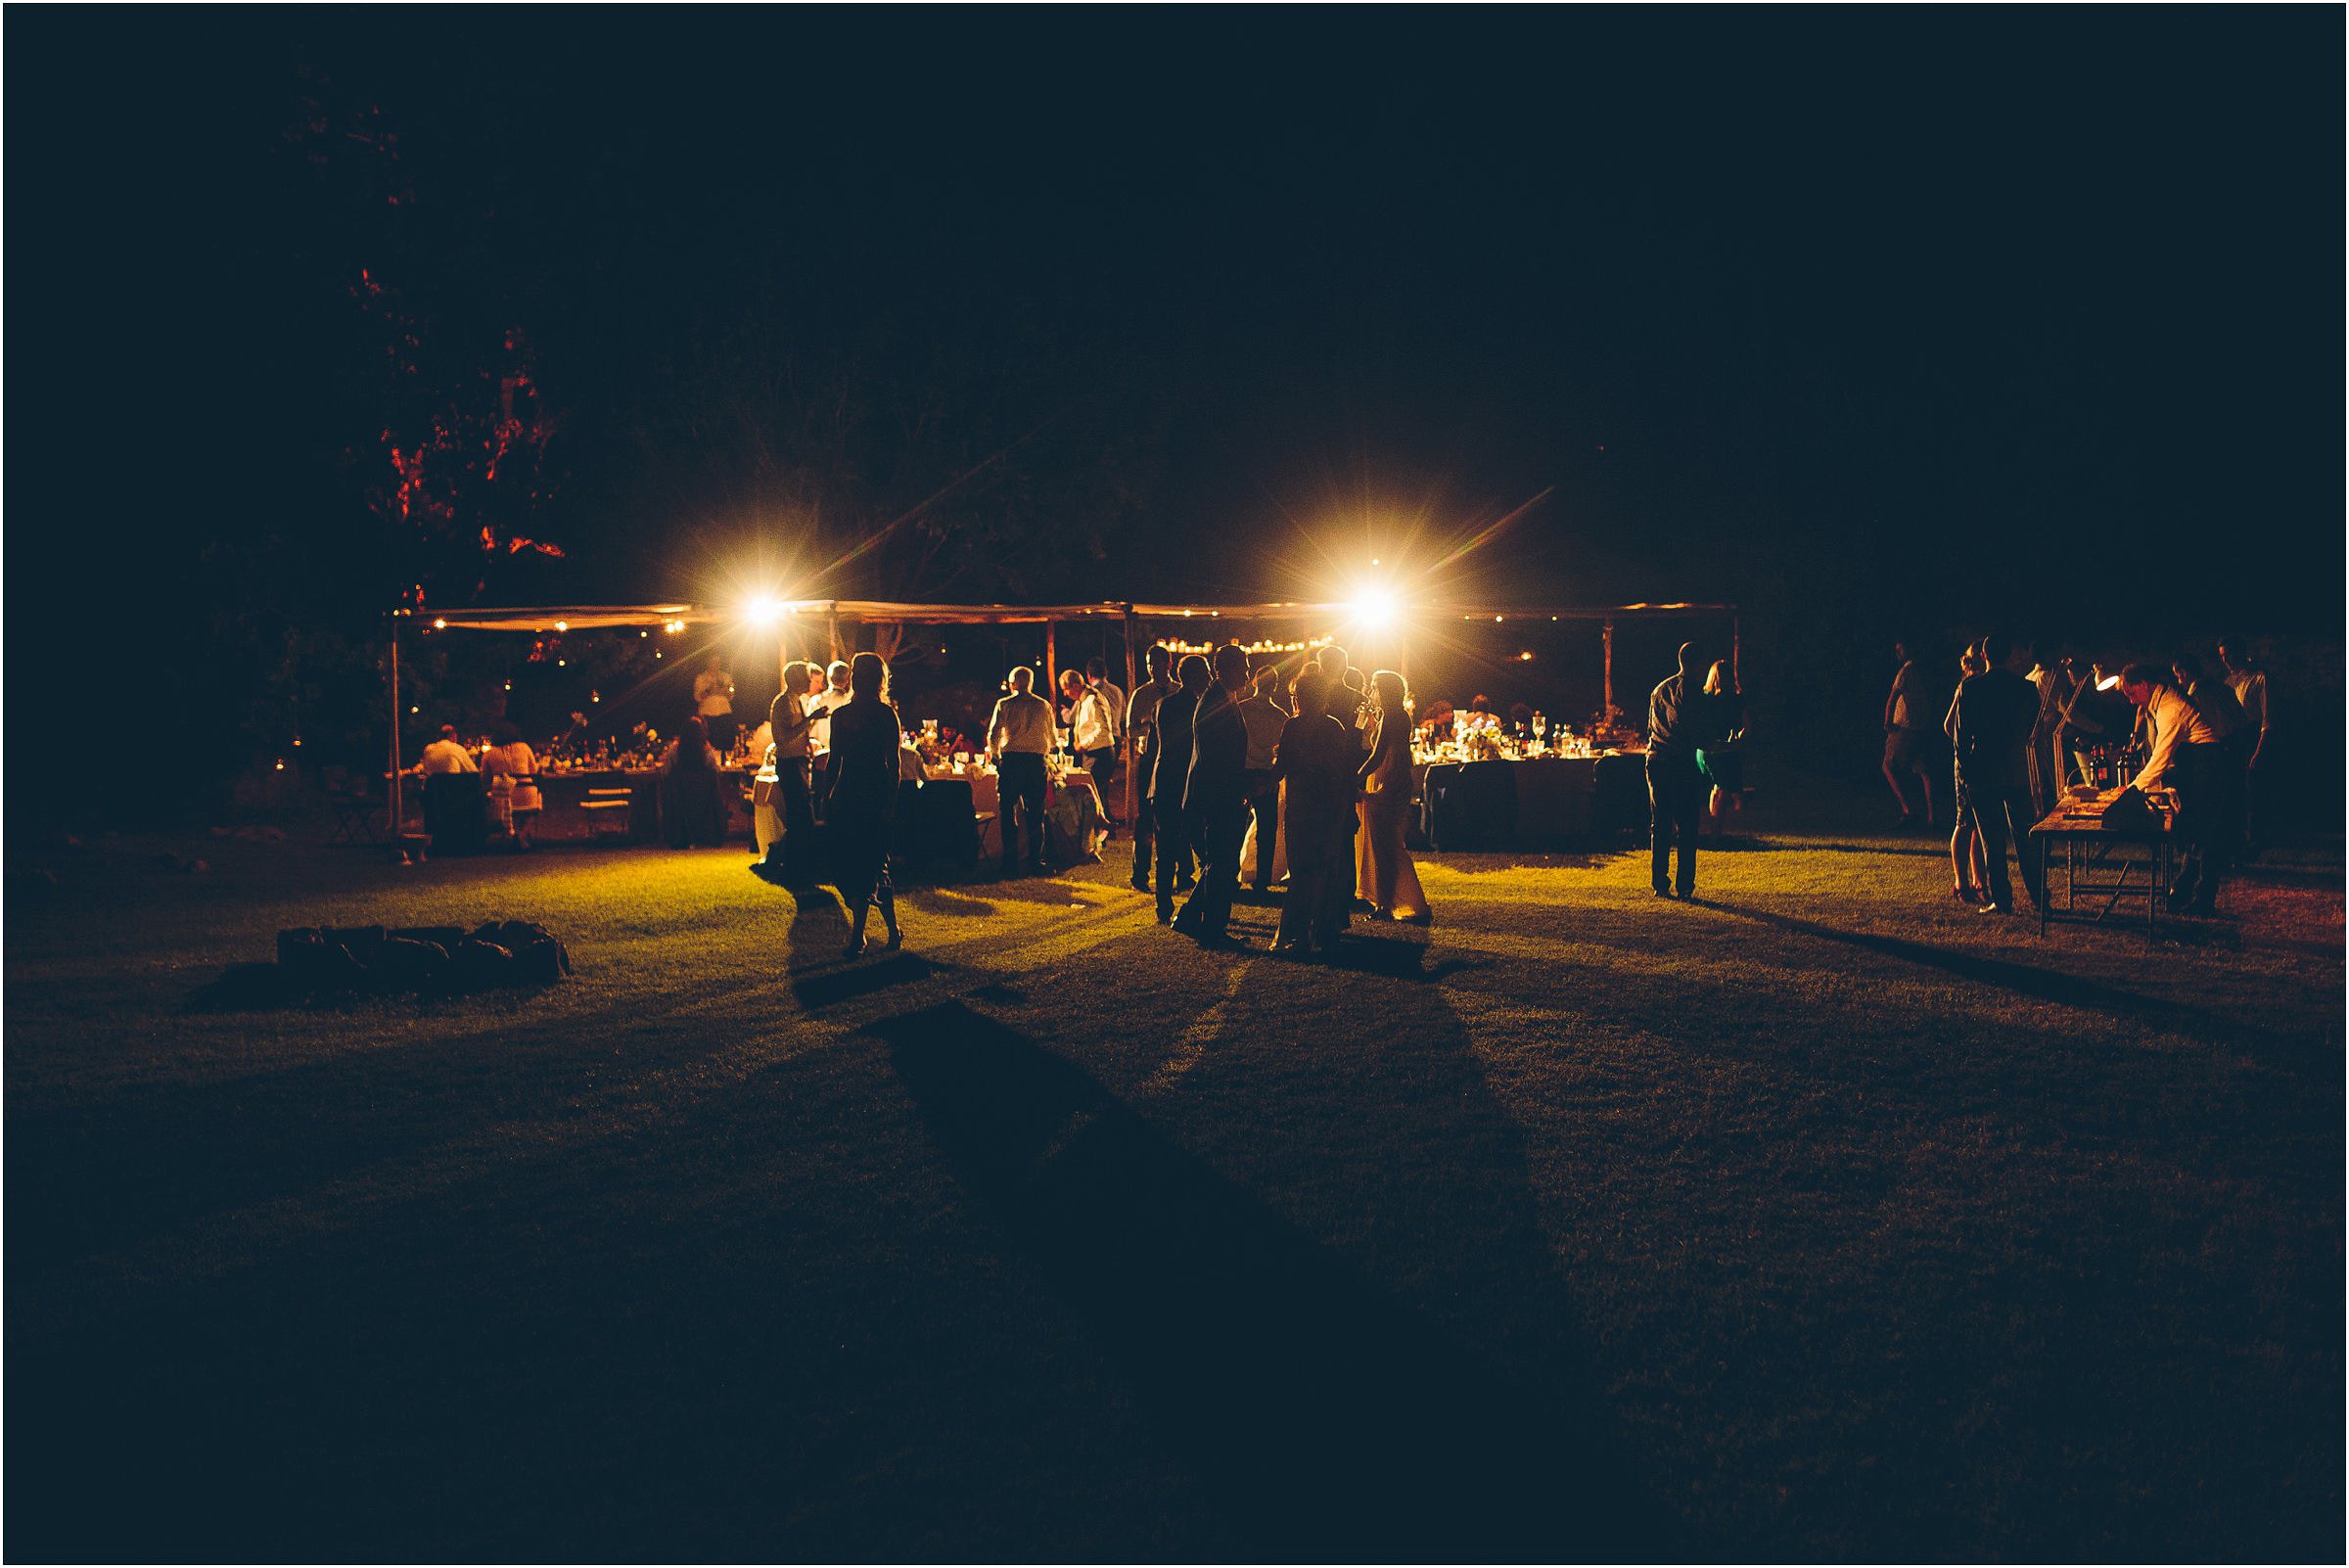 Guests at a destination wedding in Tuscany gather in the soft light of their outdoor party in the night.